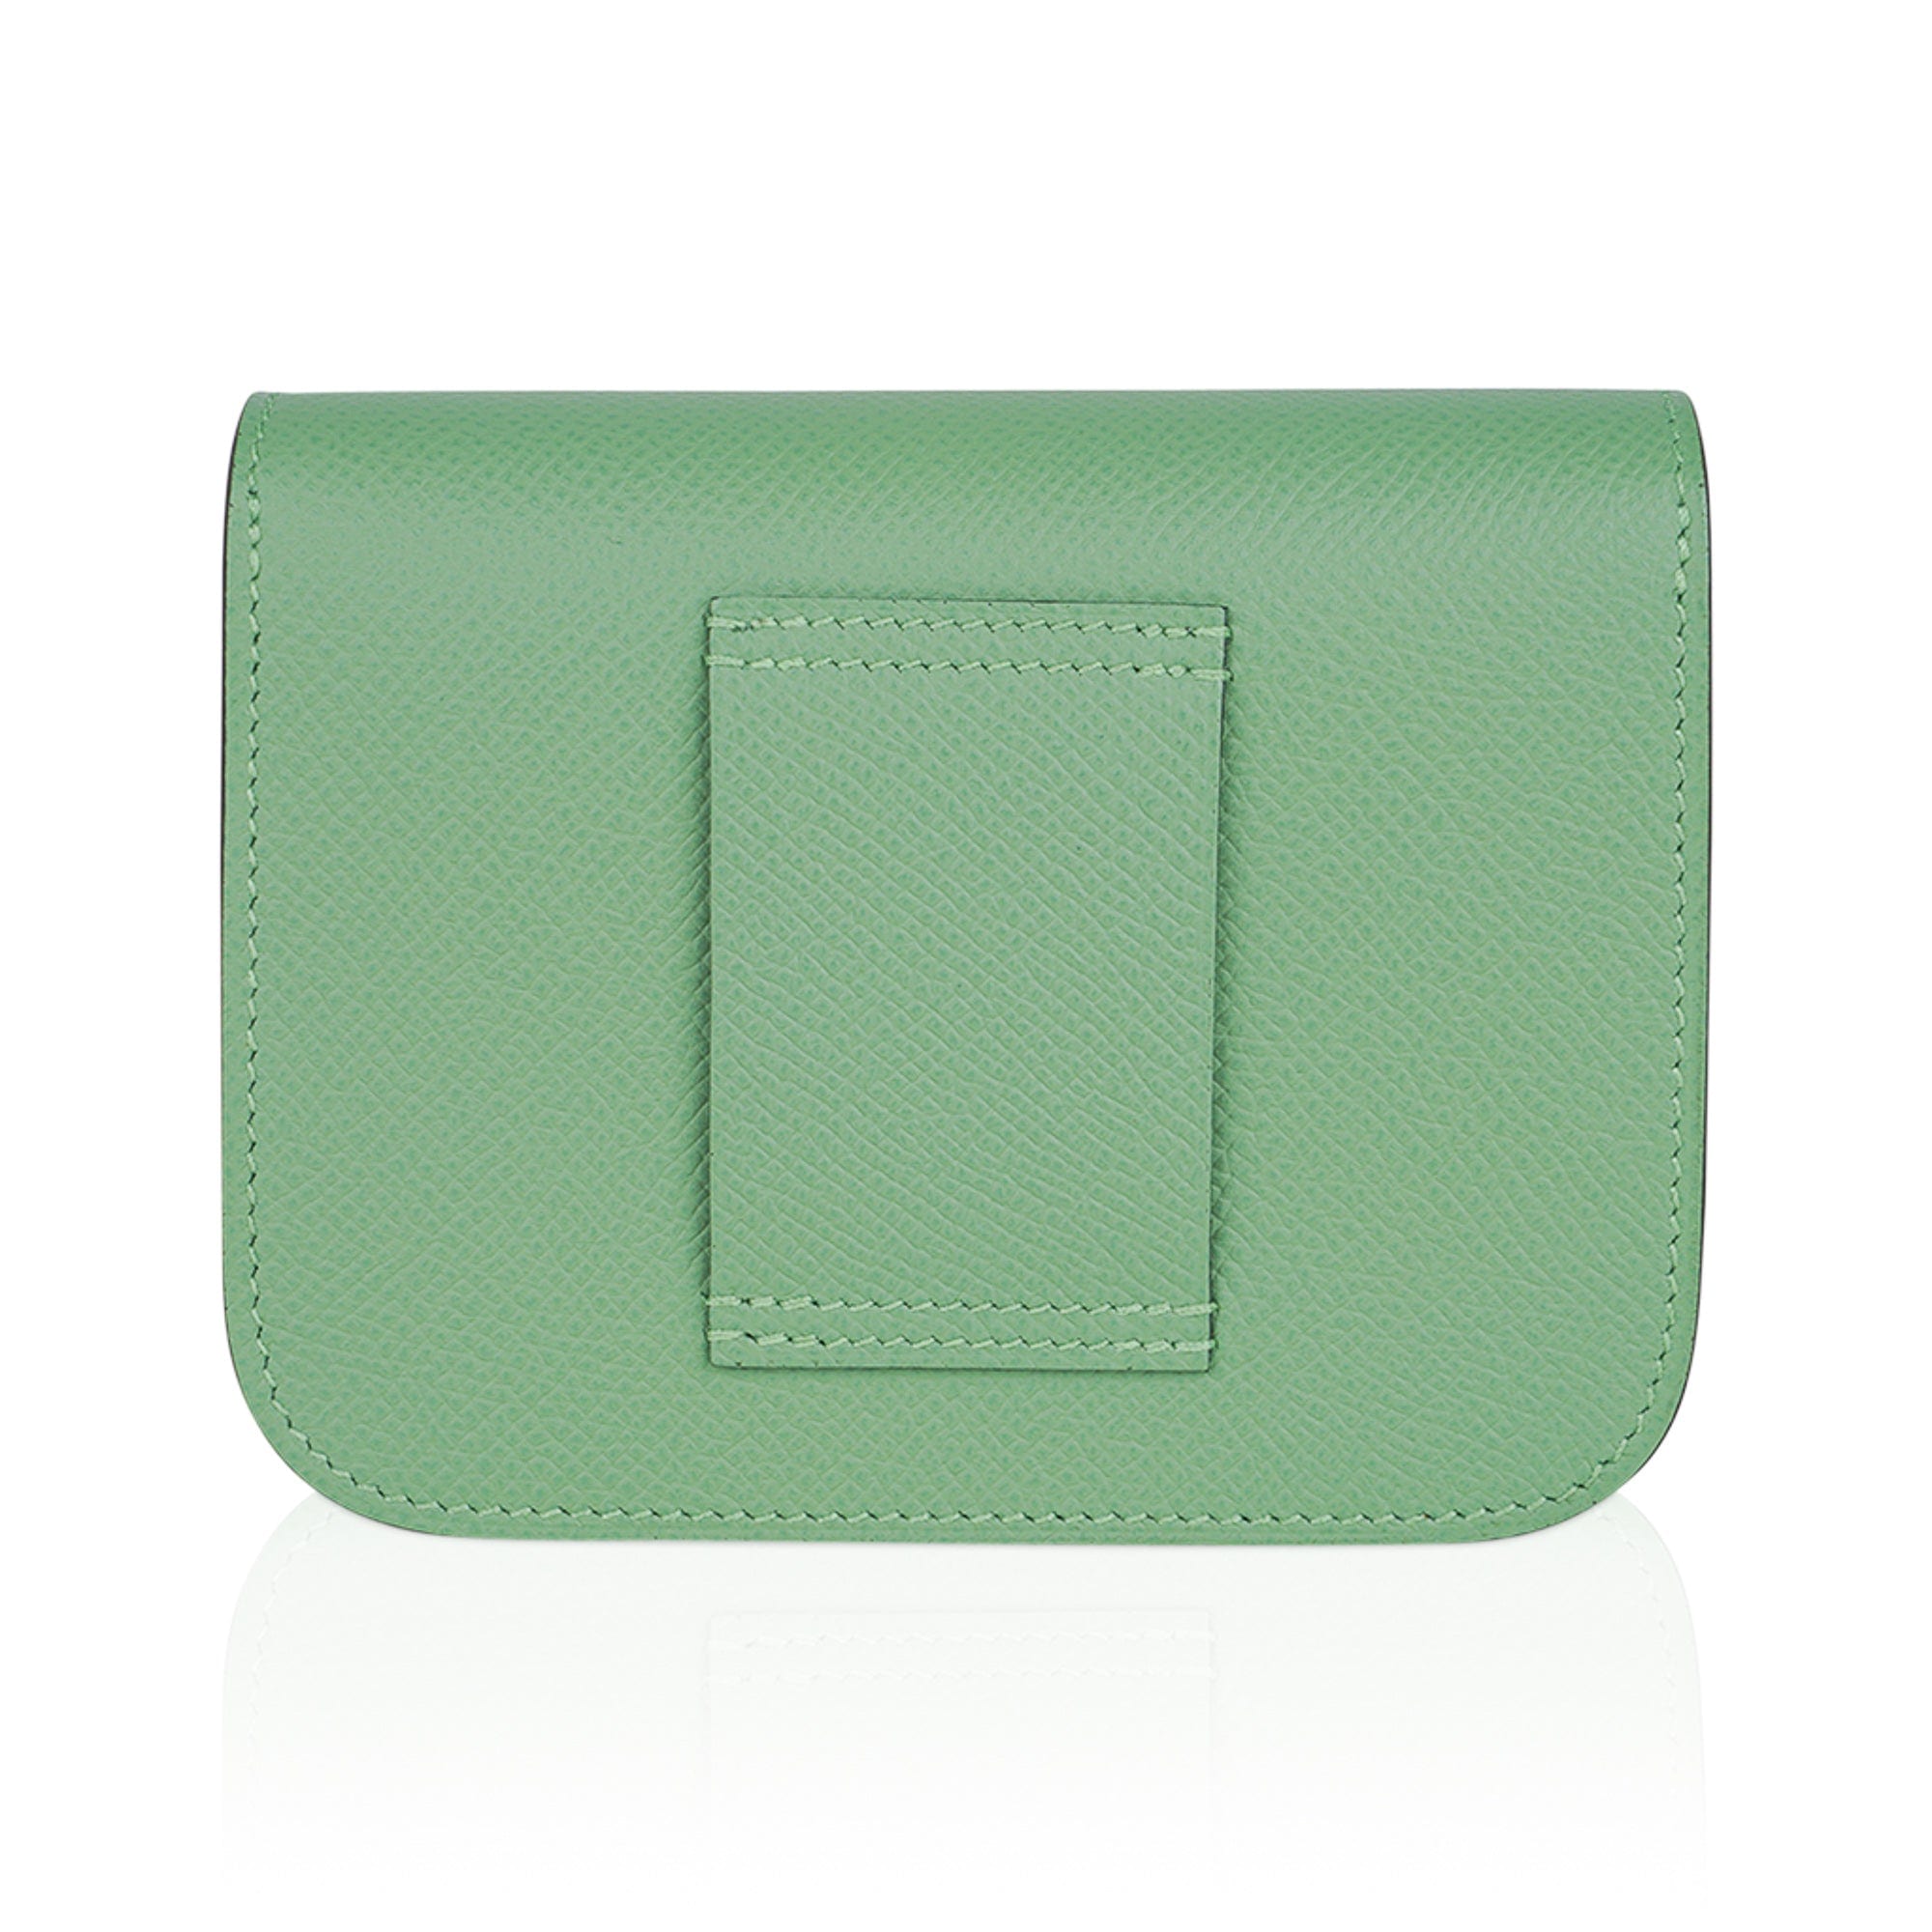 Hermes Constance Slim Wallet In Vert Criquet Epsom Leather With Gold  Hardware